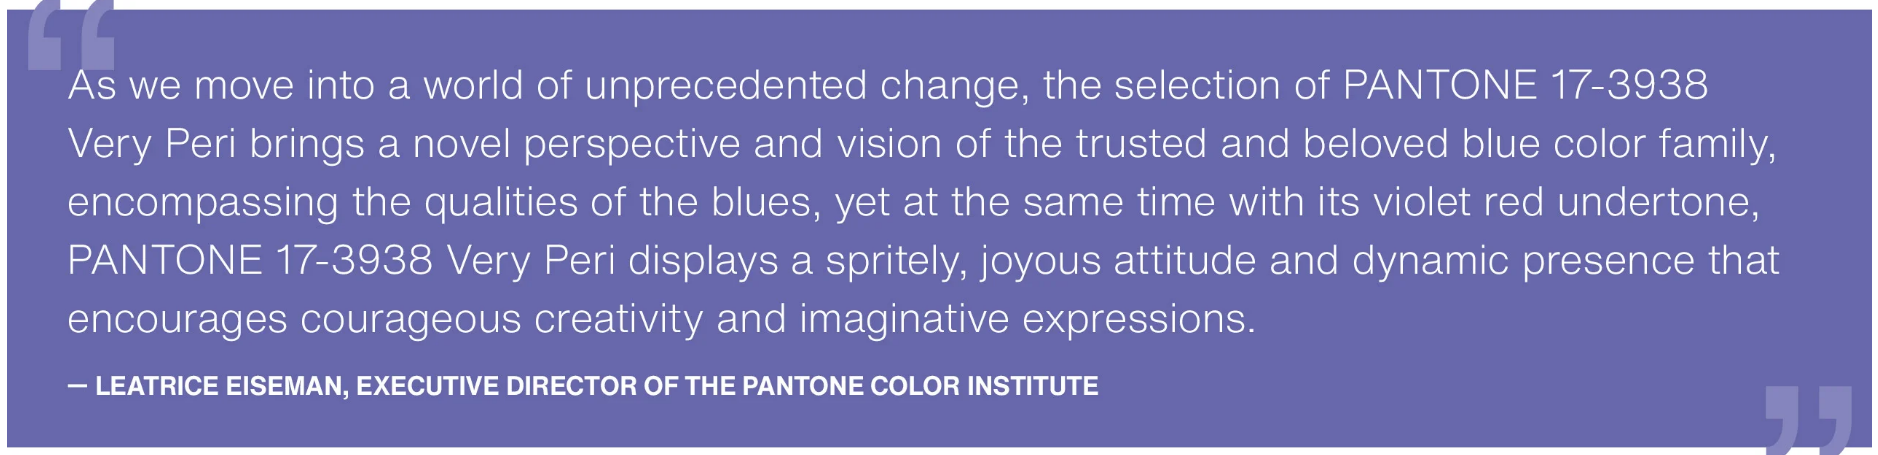 What Is Pantone's Colour Of The Year